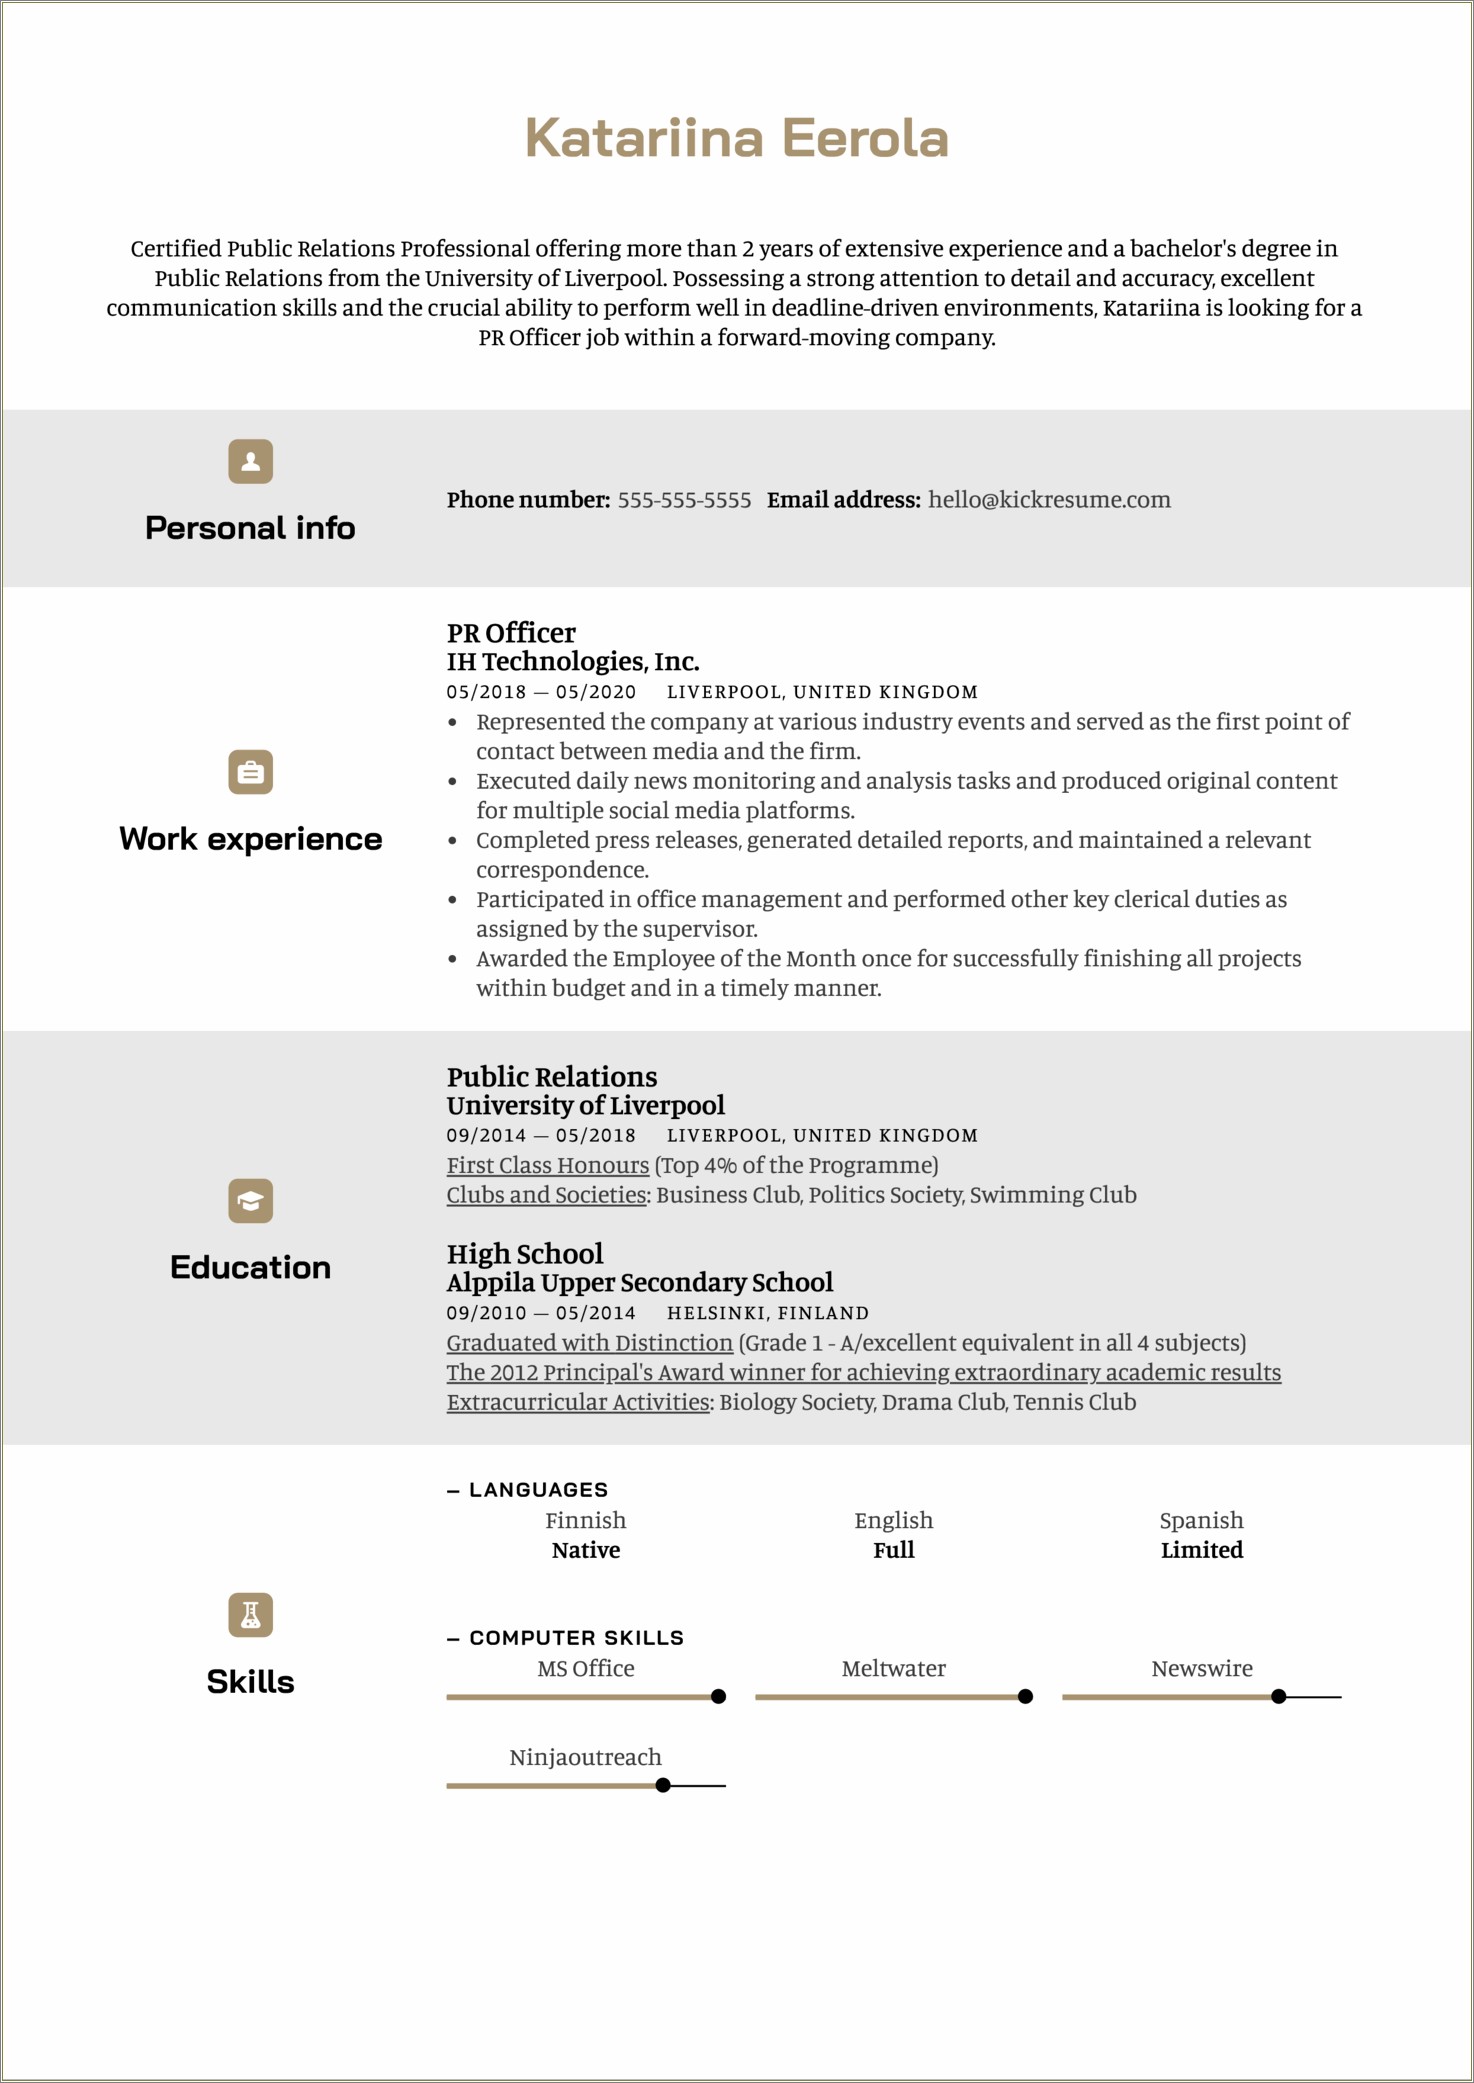 Are Certifications Considered Skills On A Resume